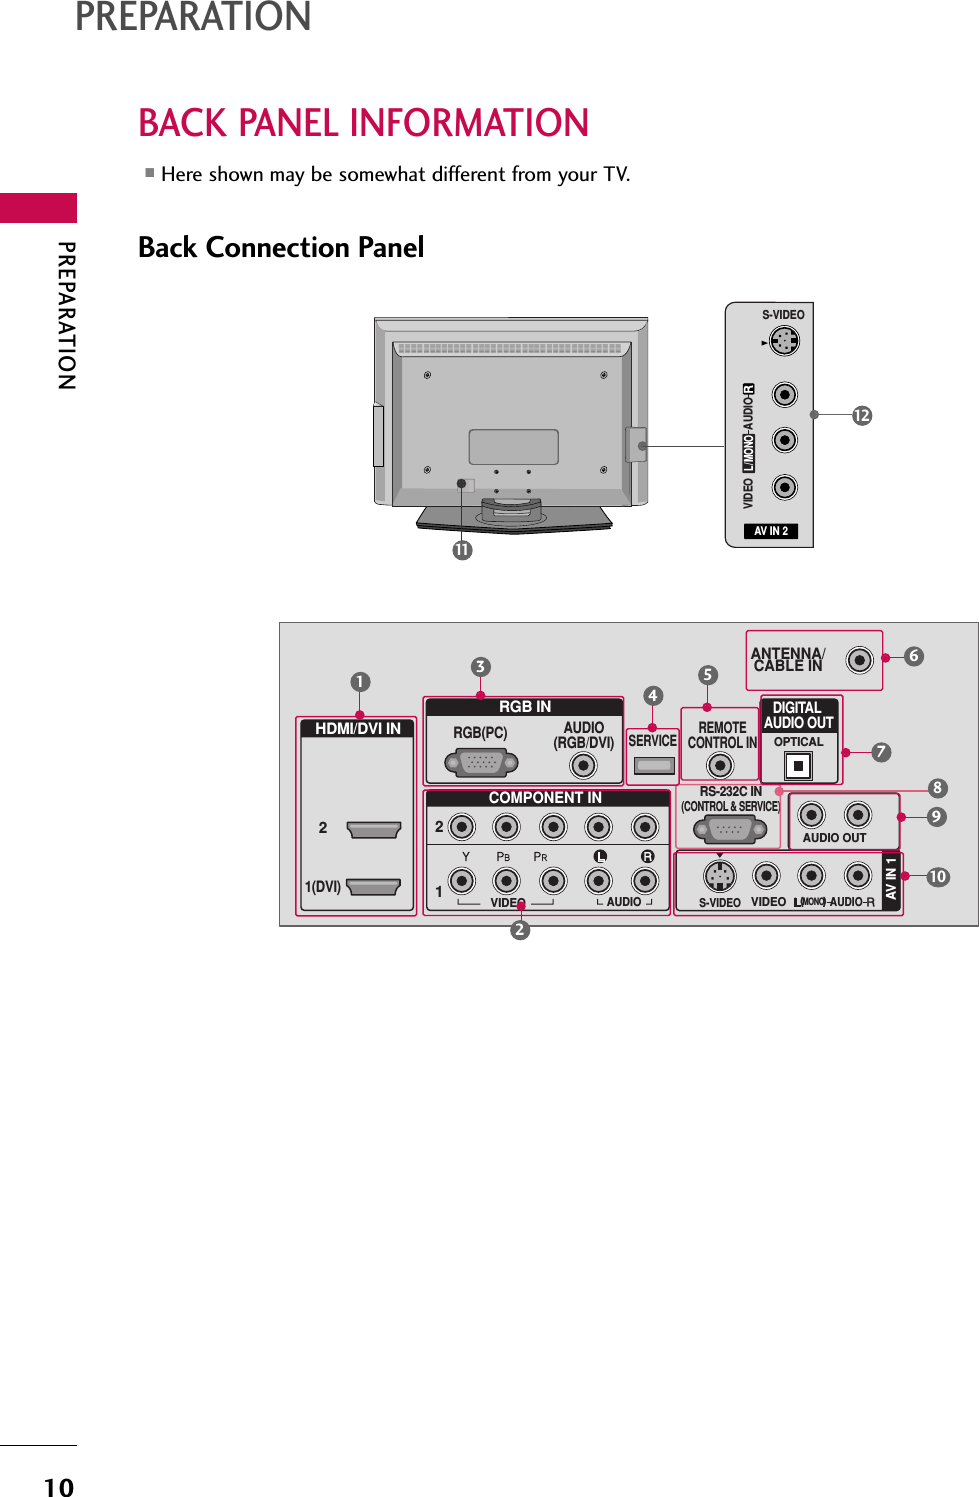 PREPARATION10BACK PANEL INFORMATIONPREPARATION■Here shown may be somewhat different from your TV.RRGB INHDMI/DVI INCOMPONENT INAUDIO(RGB/DVI)RGB(PC)REMOTECONTROL INANTENNA/CABLE IN1(DVI)122RS-232C IN(CONTROL &amp; SERVICE)VIDEOAUDIOVIDEOAUDIO OUTOPTICALMONO(                        )AUDIOS-VIDEODIGITAL AUDIO OUTAV IN 1SERVICE13546792108Back Connection PanelAV IN 2L/MONORAUDIOVIDEOS-VIDEO(            )1211